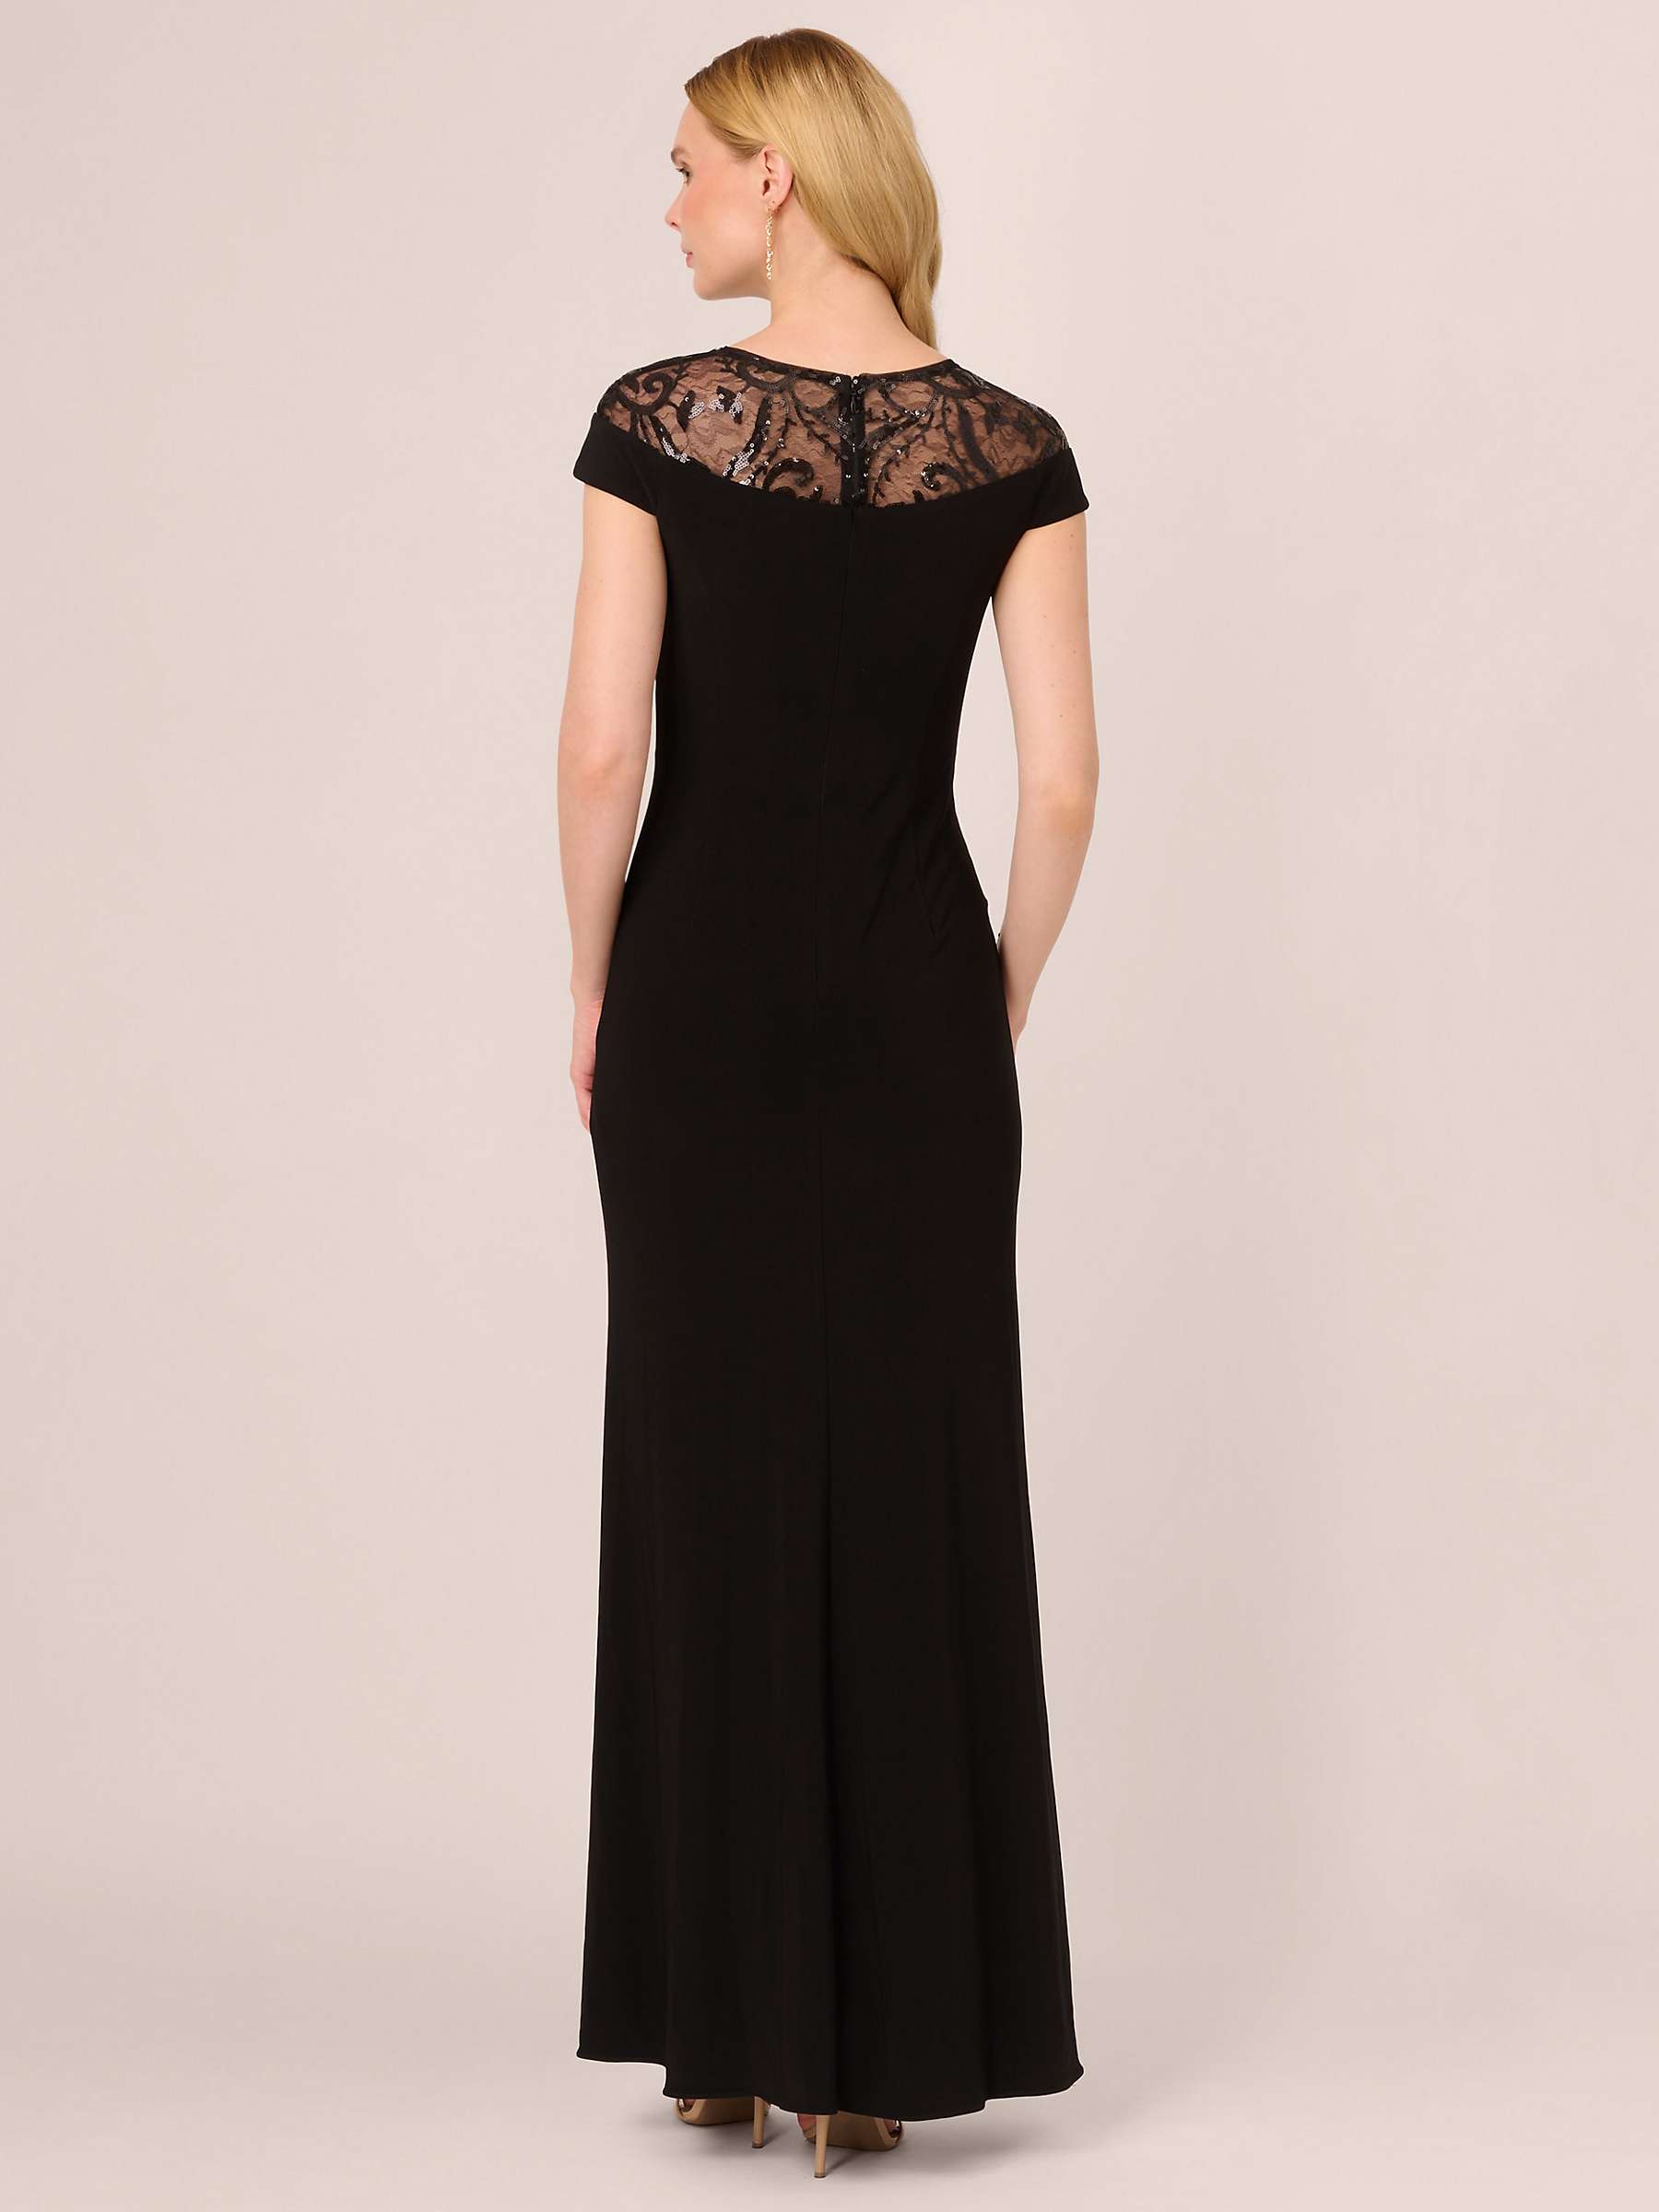 Buy Adrianna Papell Papell Studio Beaded Jersey Gown, Black Online at johnlewis.com